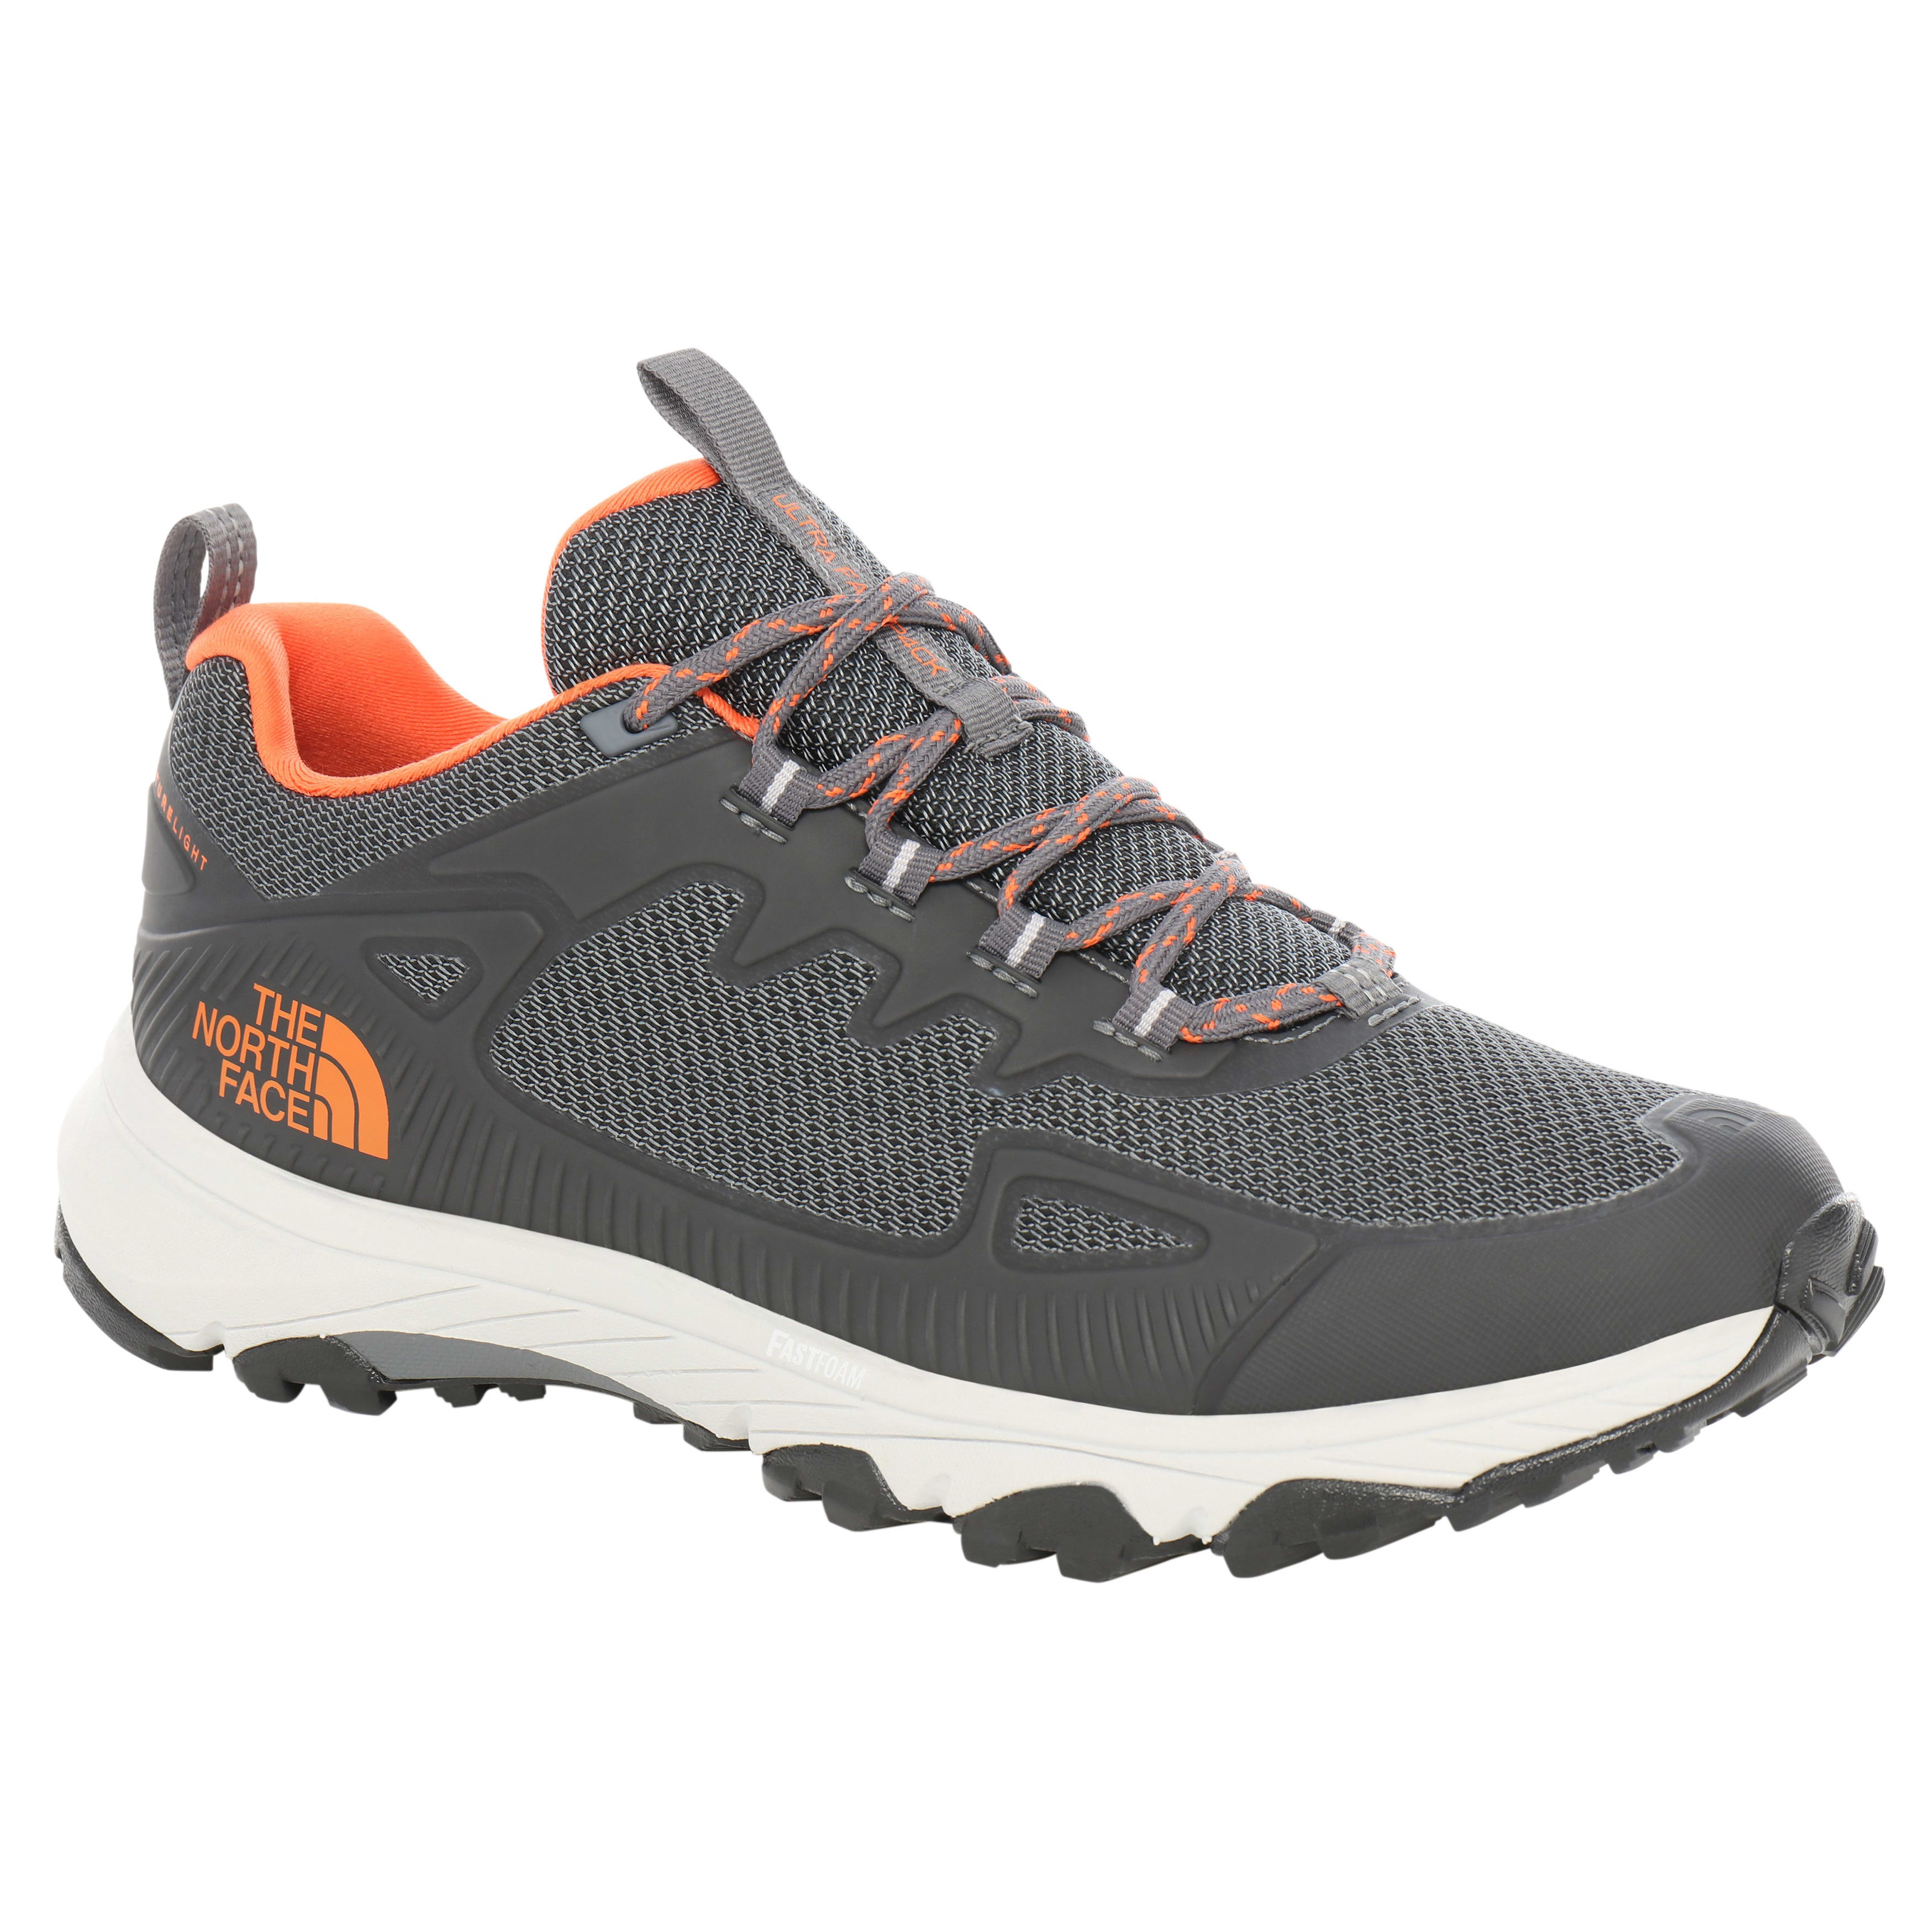 Buy The North Face Men's Ultra Fastpack IV FutureLight from Outnorth